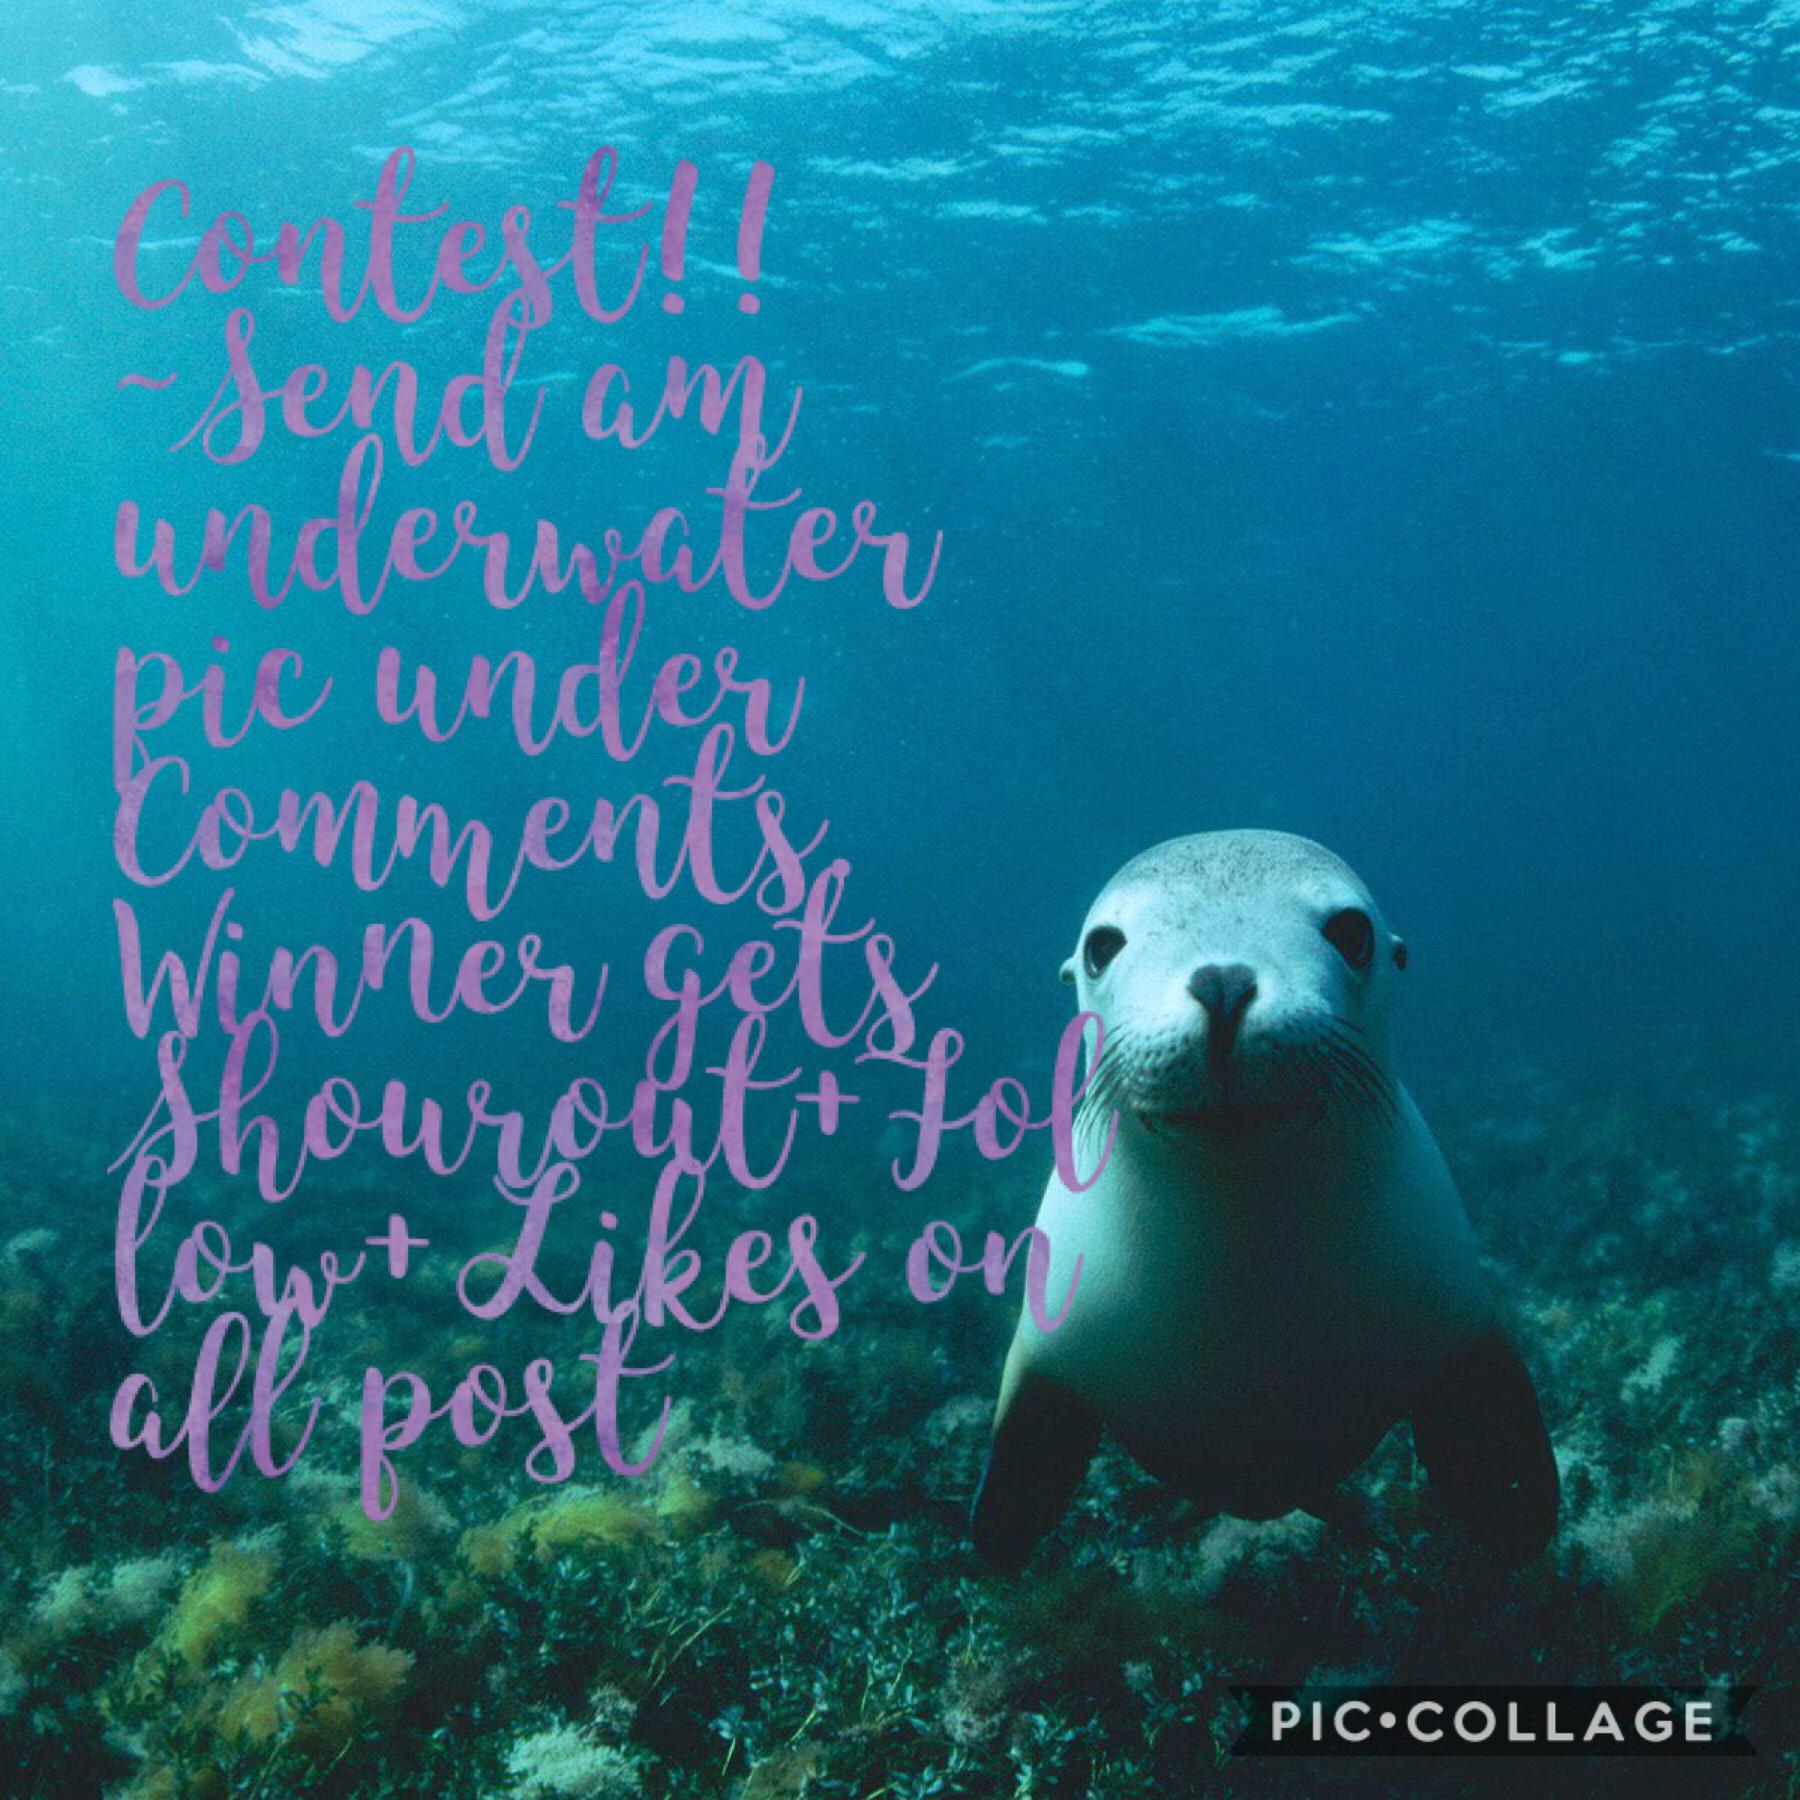 Contest!!~send an underwater pic under comments on this post. Winner gets Shoutout+Follow+Likes on all post!! Good luck!! 